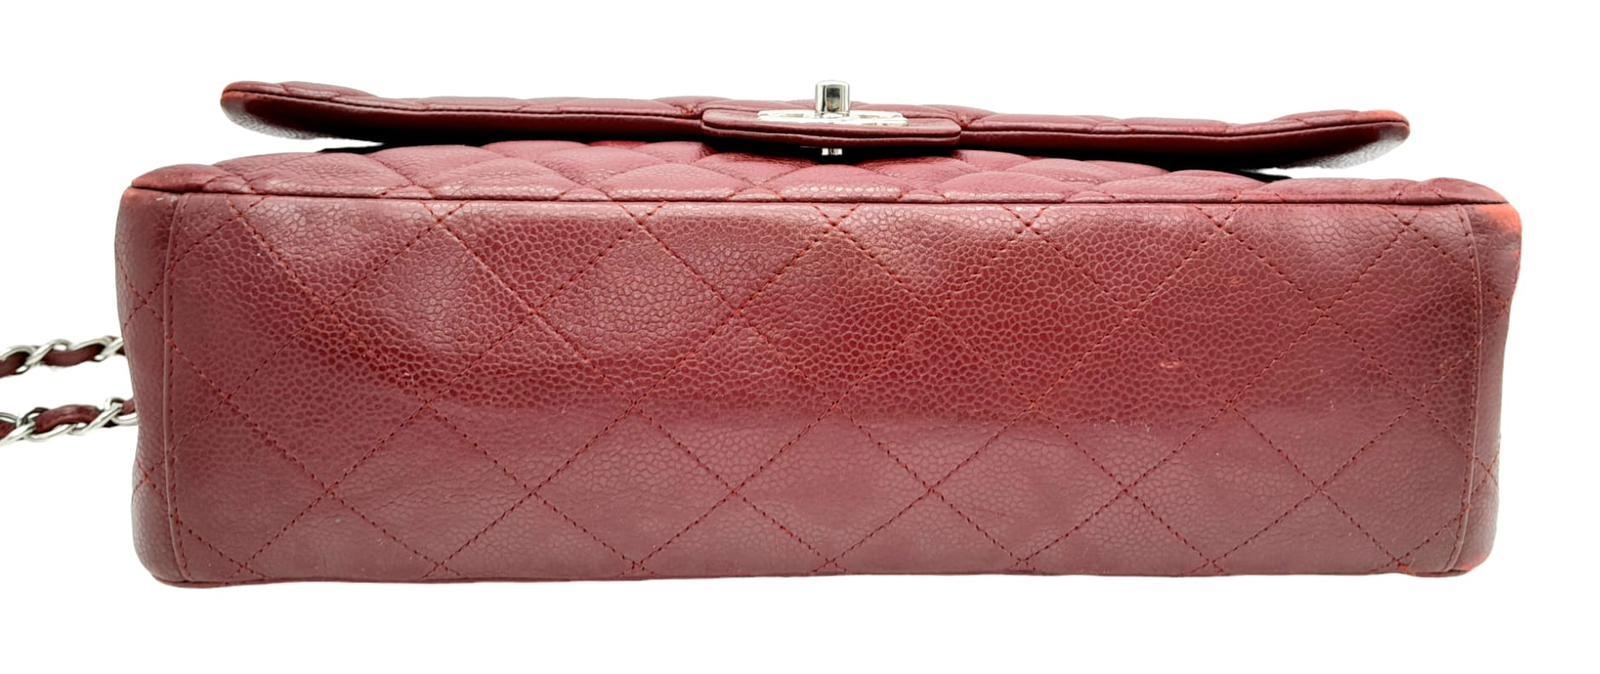 A Chanel Burgundy Jumbo Classic Double Flap Bag. Quilted leather exterior with silver-toned - Image 3 of 16